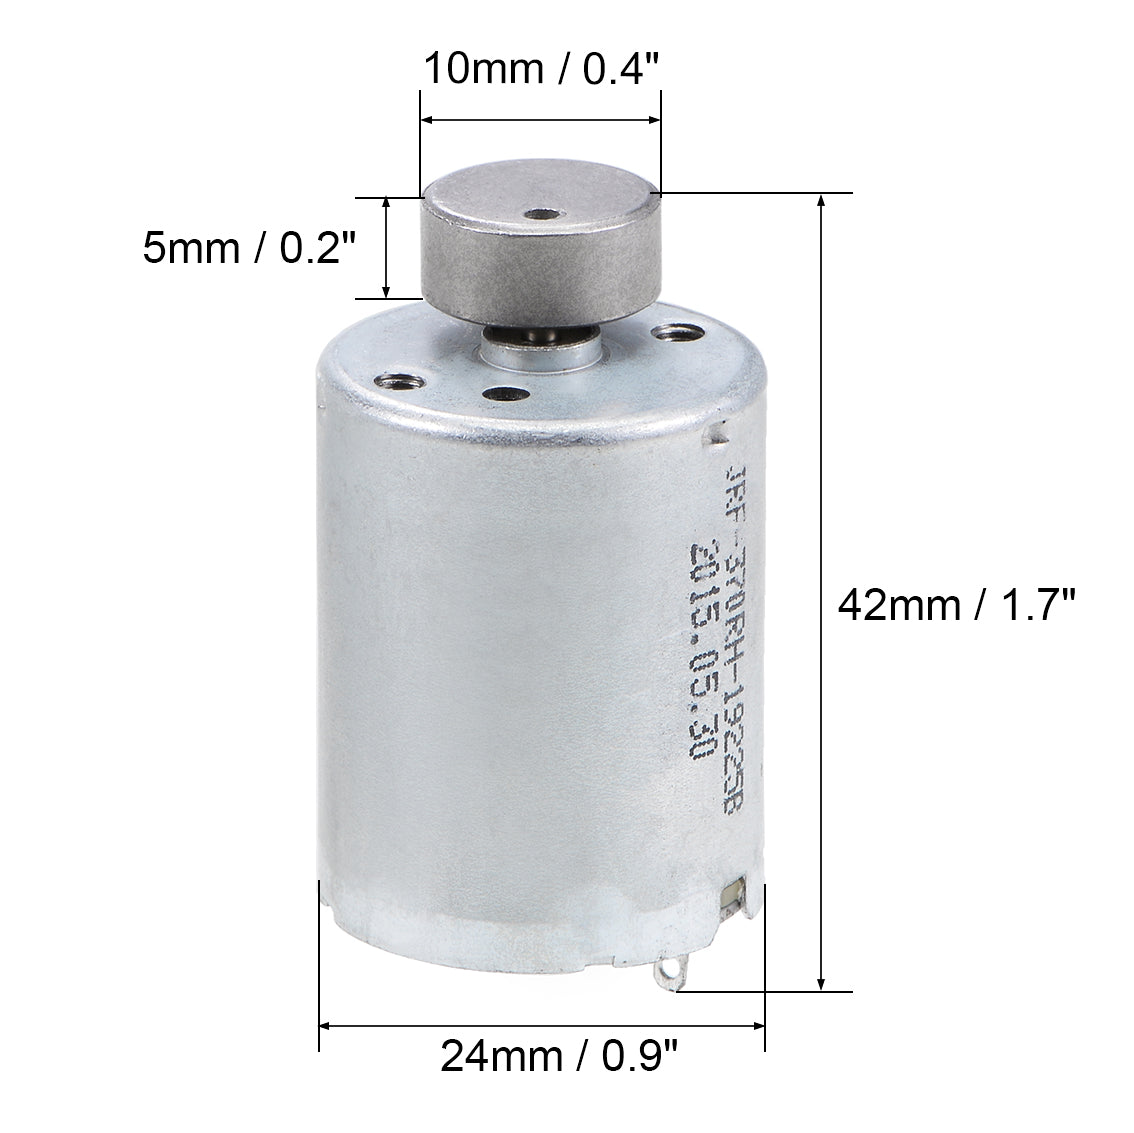 uxcell Uxcell Vibration Motors DC 12V 250mA 7500RPM Vibrating Motor Strong Power for DIY Electric  42x24mm 2Pcs